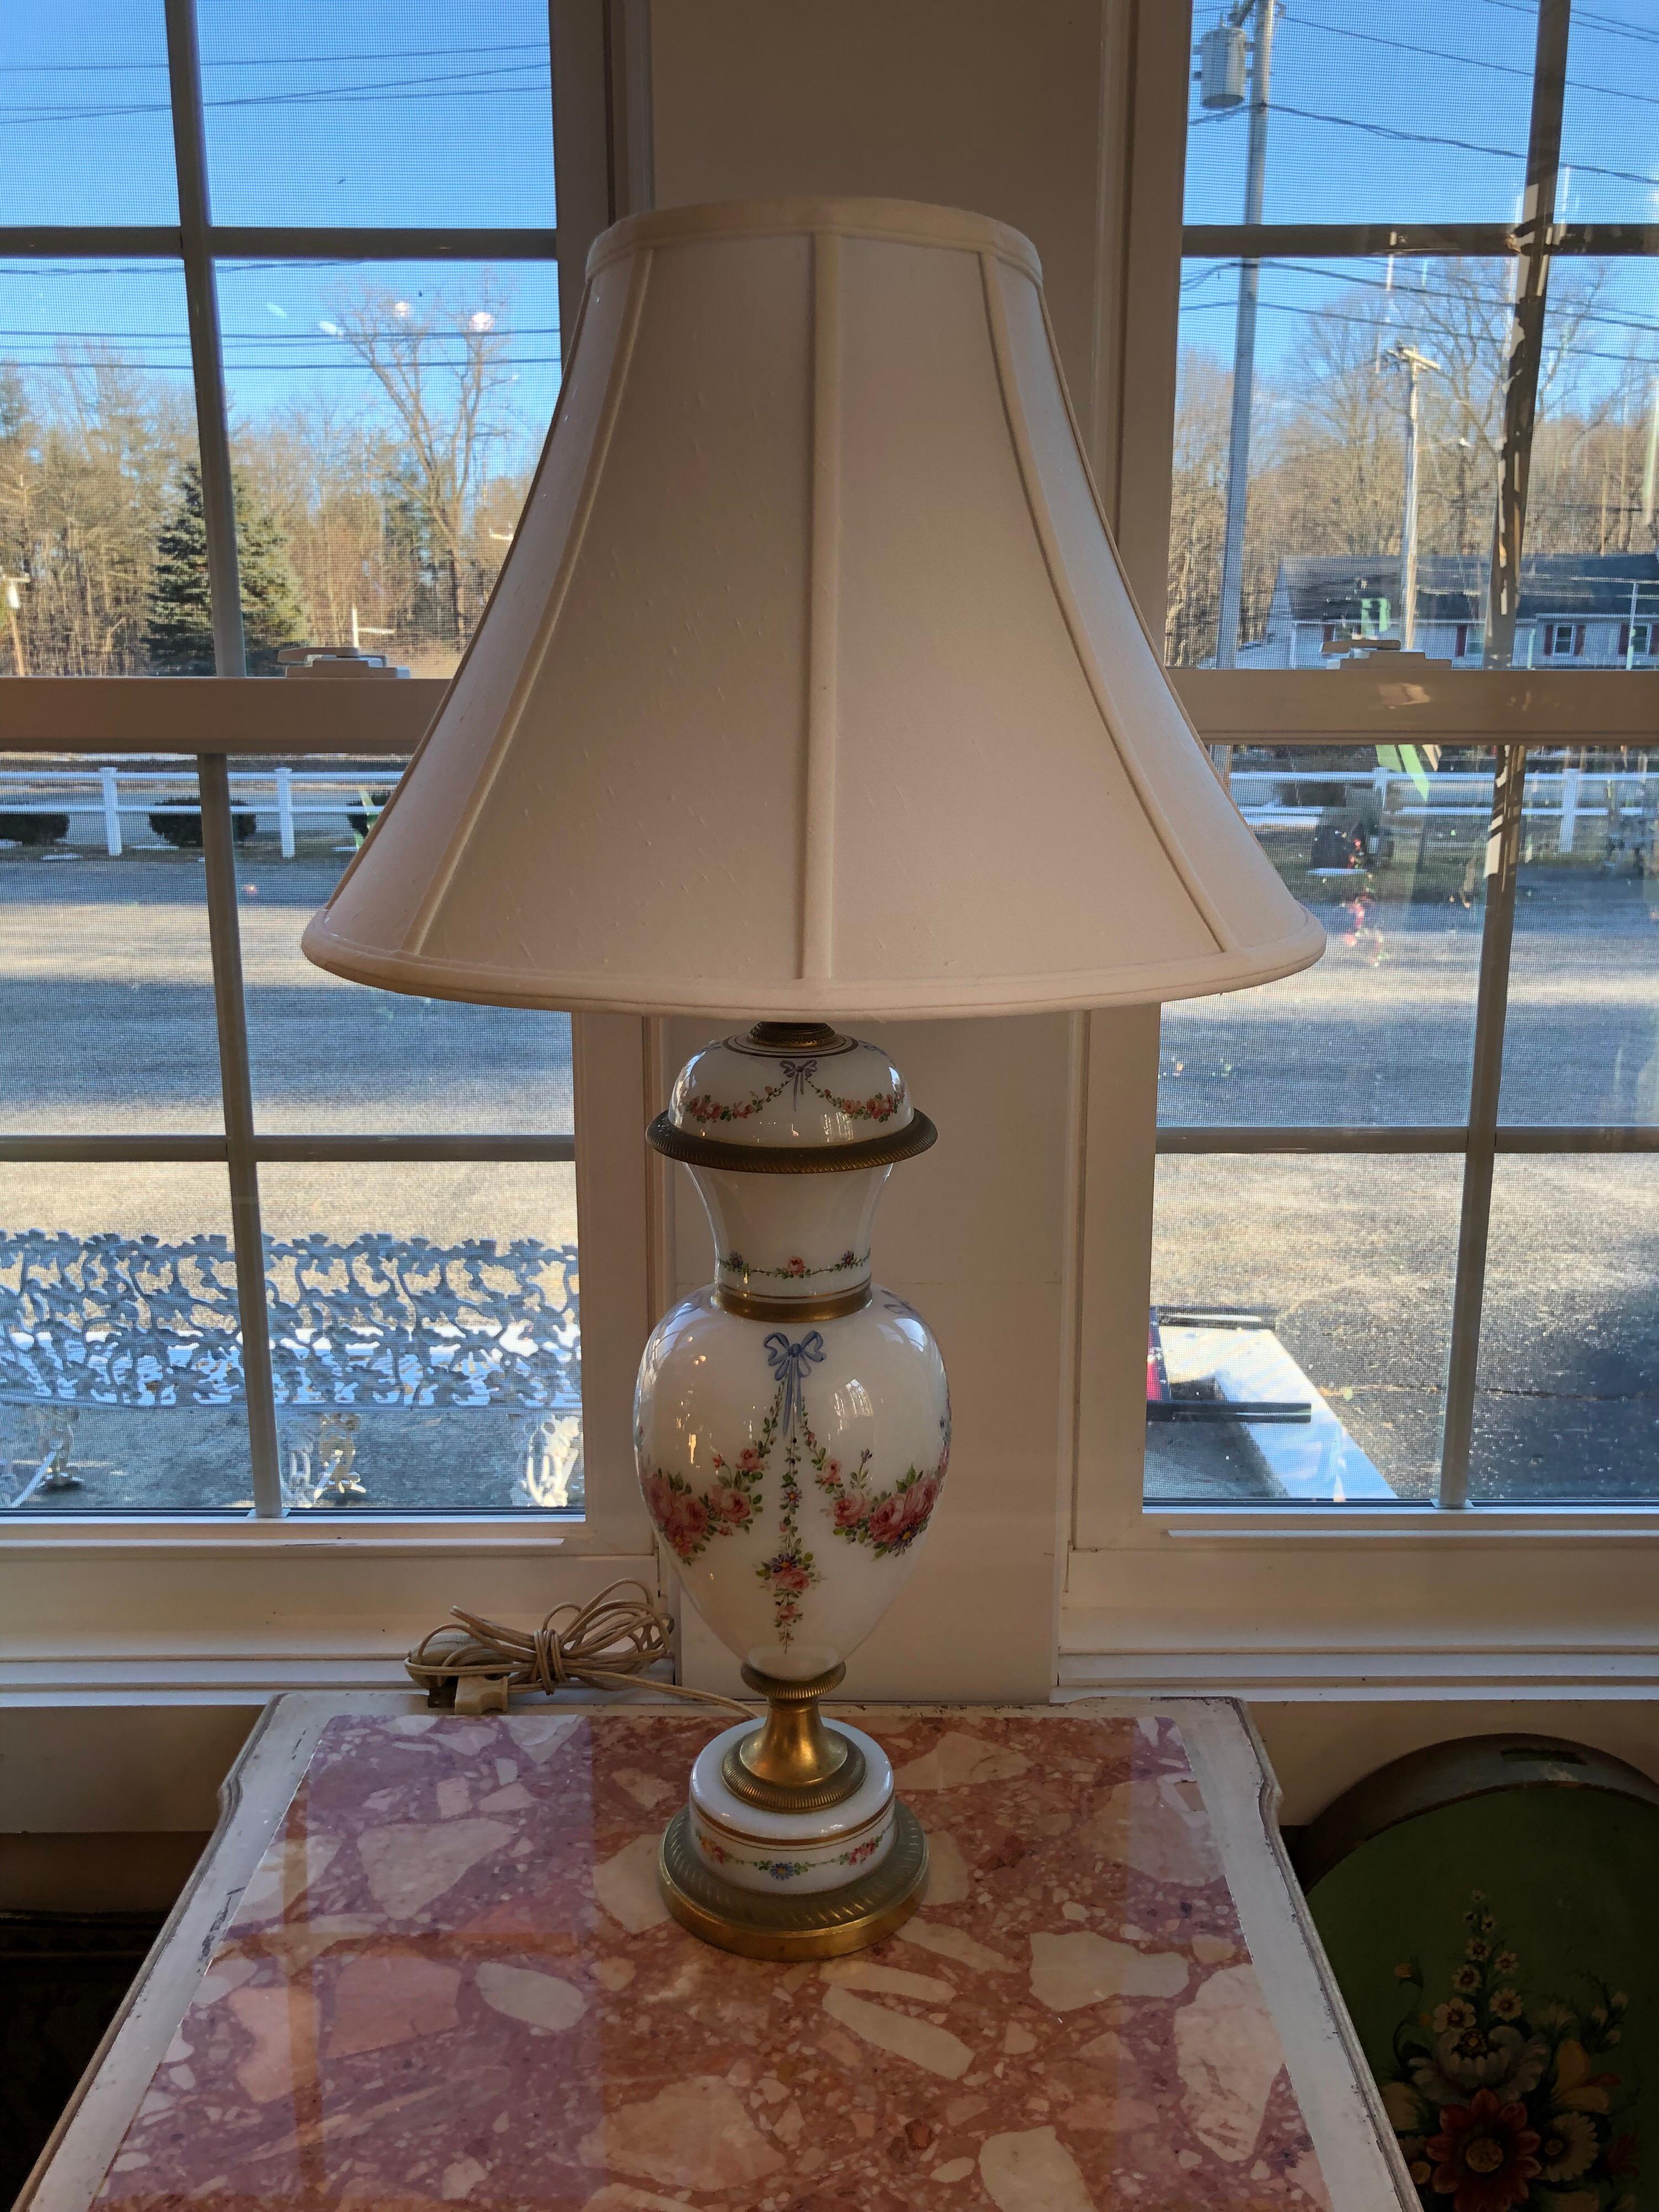 French porcelain hand signed lamp. Heavy and weighted. Brass base. A beautiful addition to light up any room. Signed and hand painted. Singed R. Werner artist. Delicate and feminine. Perfect for a little girls room. With shade measures: 31 high and